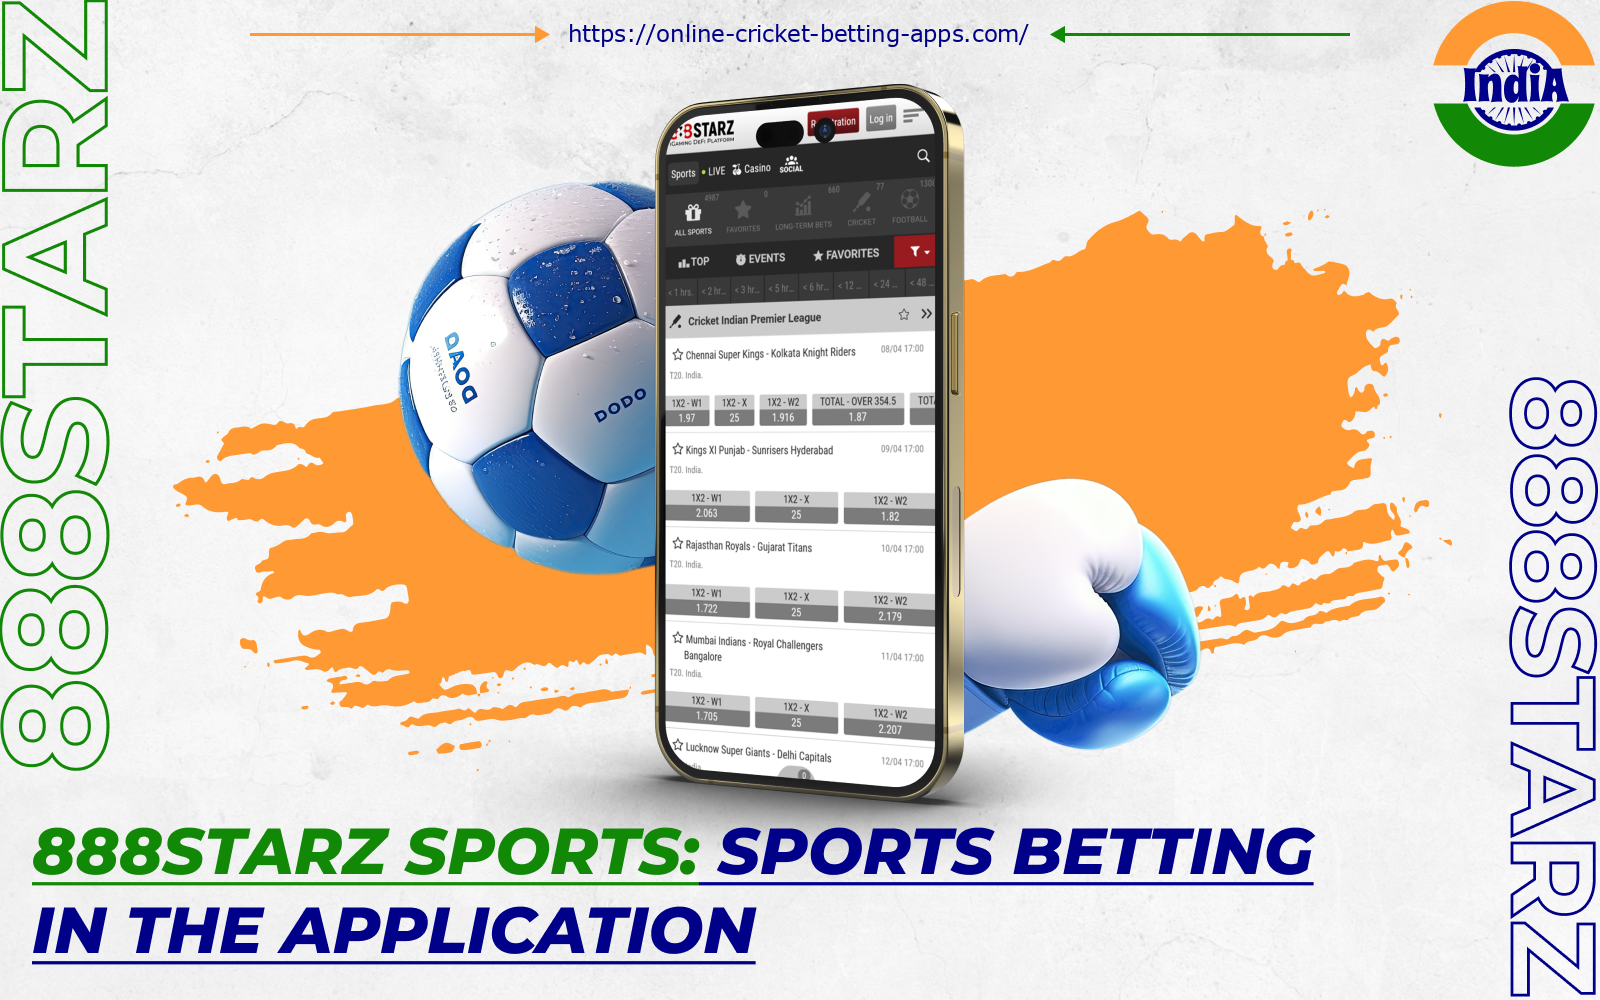 With the 888starz mobile app, players from India can bet on over 30 popular sports